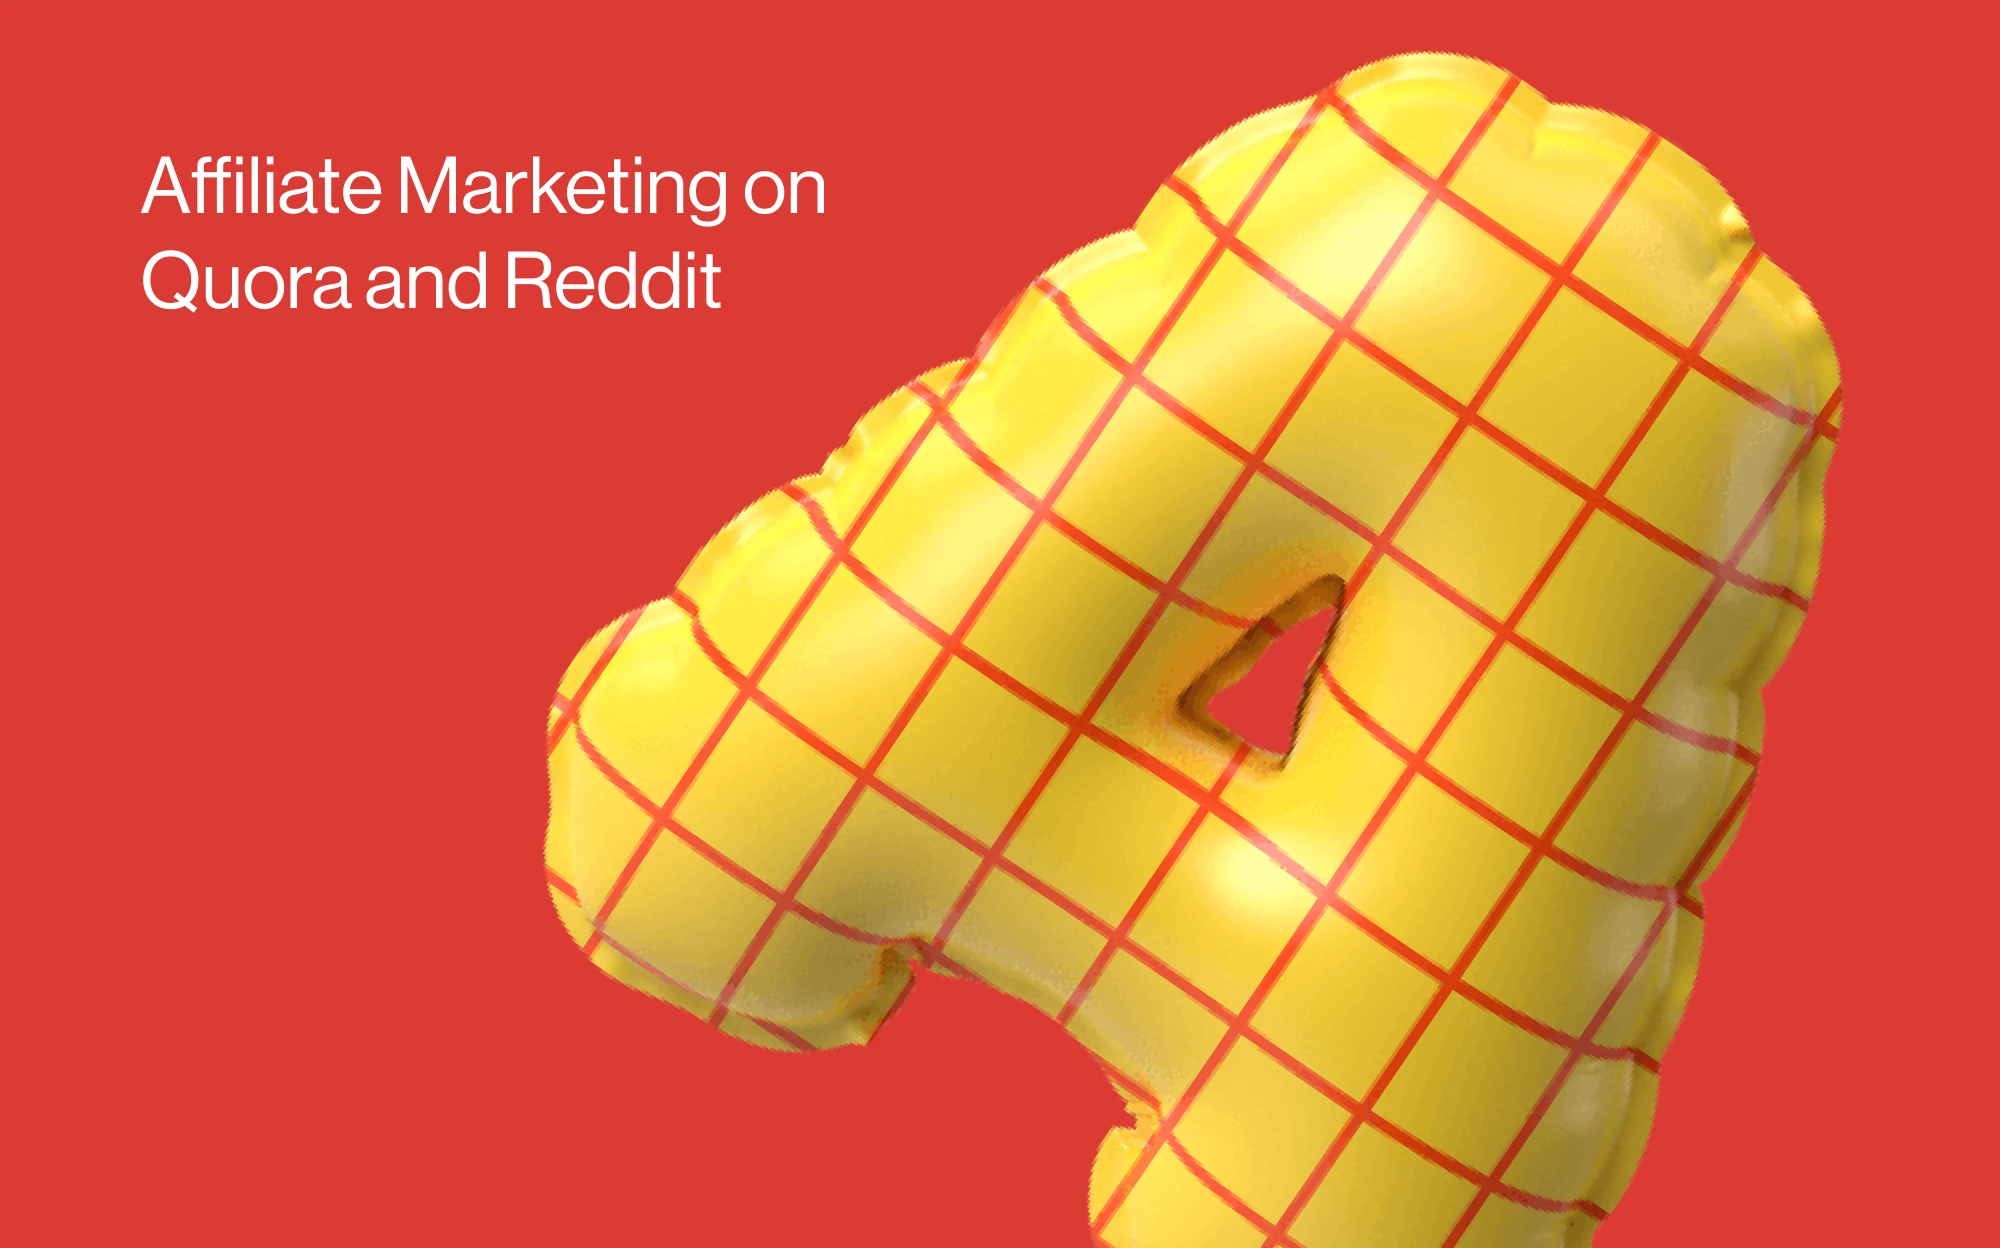 How to Perform Affiliate Marketing on Quora and Reddit